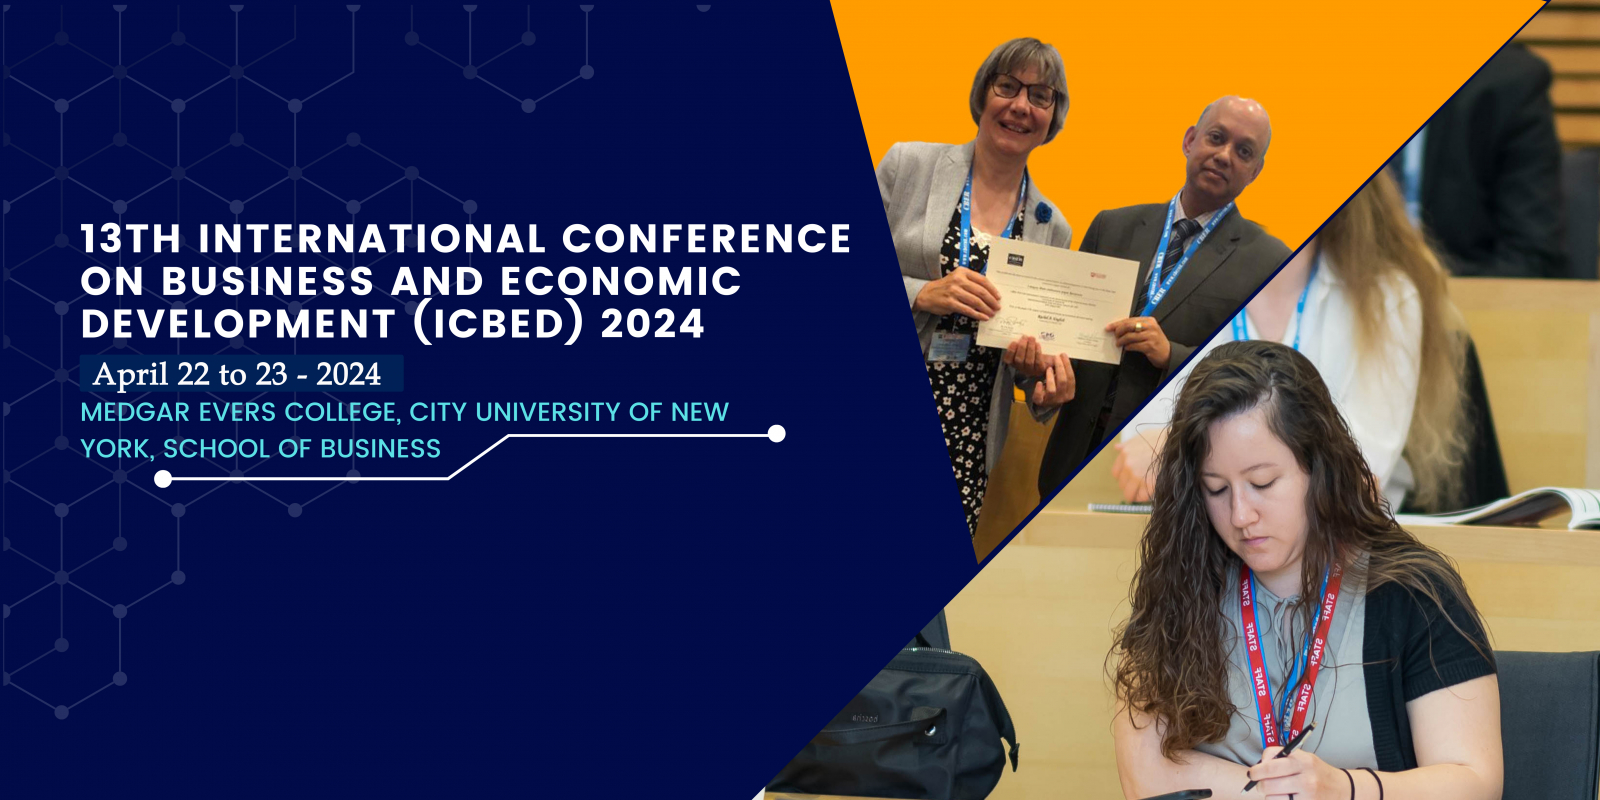 13th International Conference on Business and Economic Development (ICBED) 2024